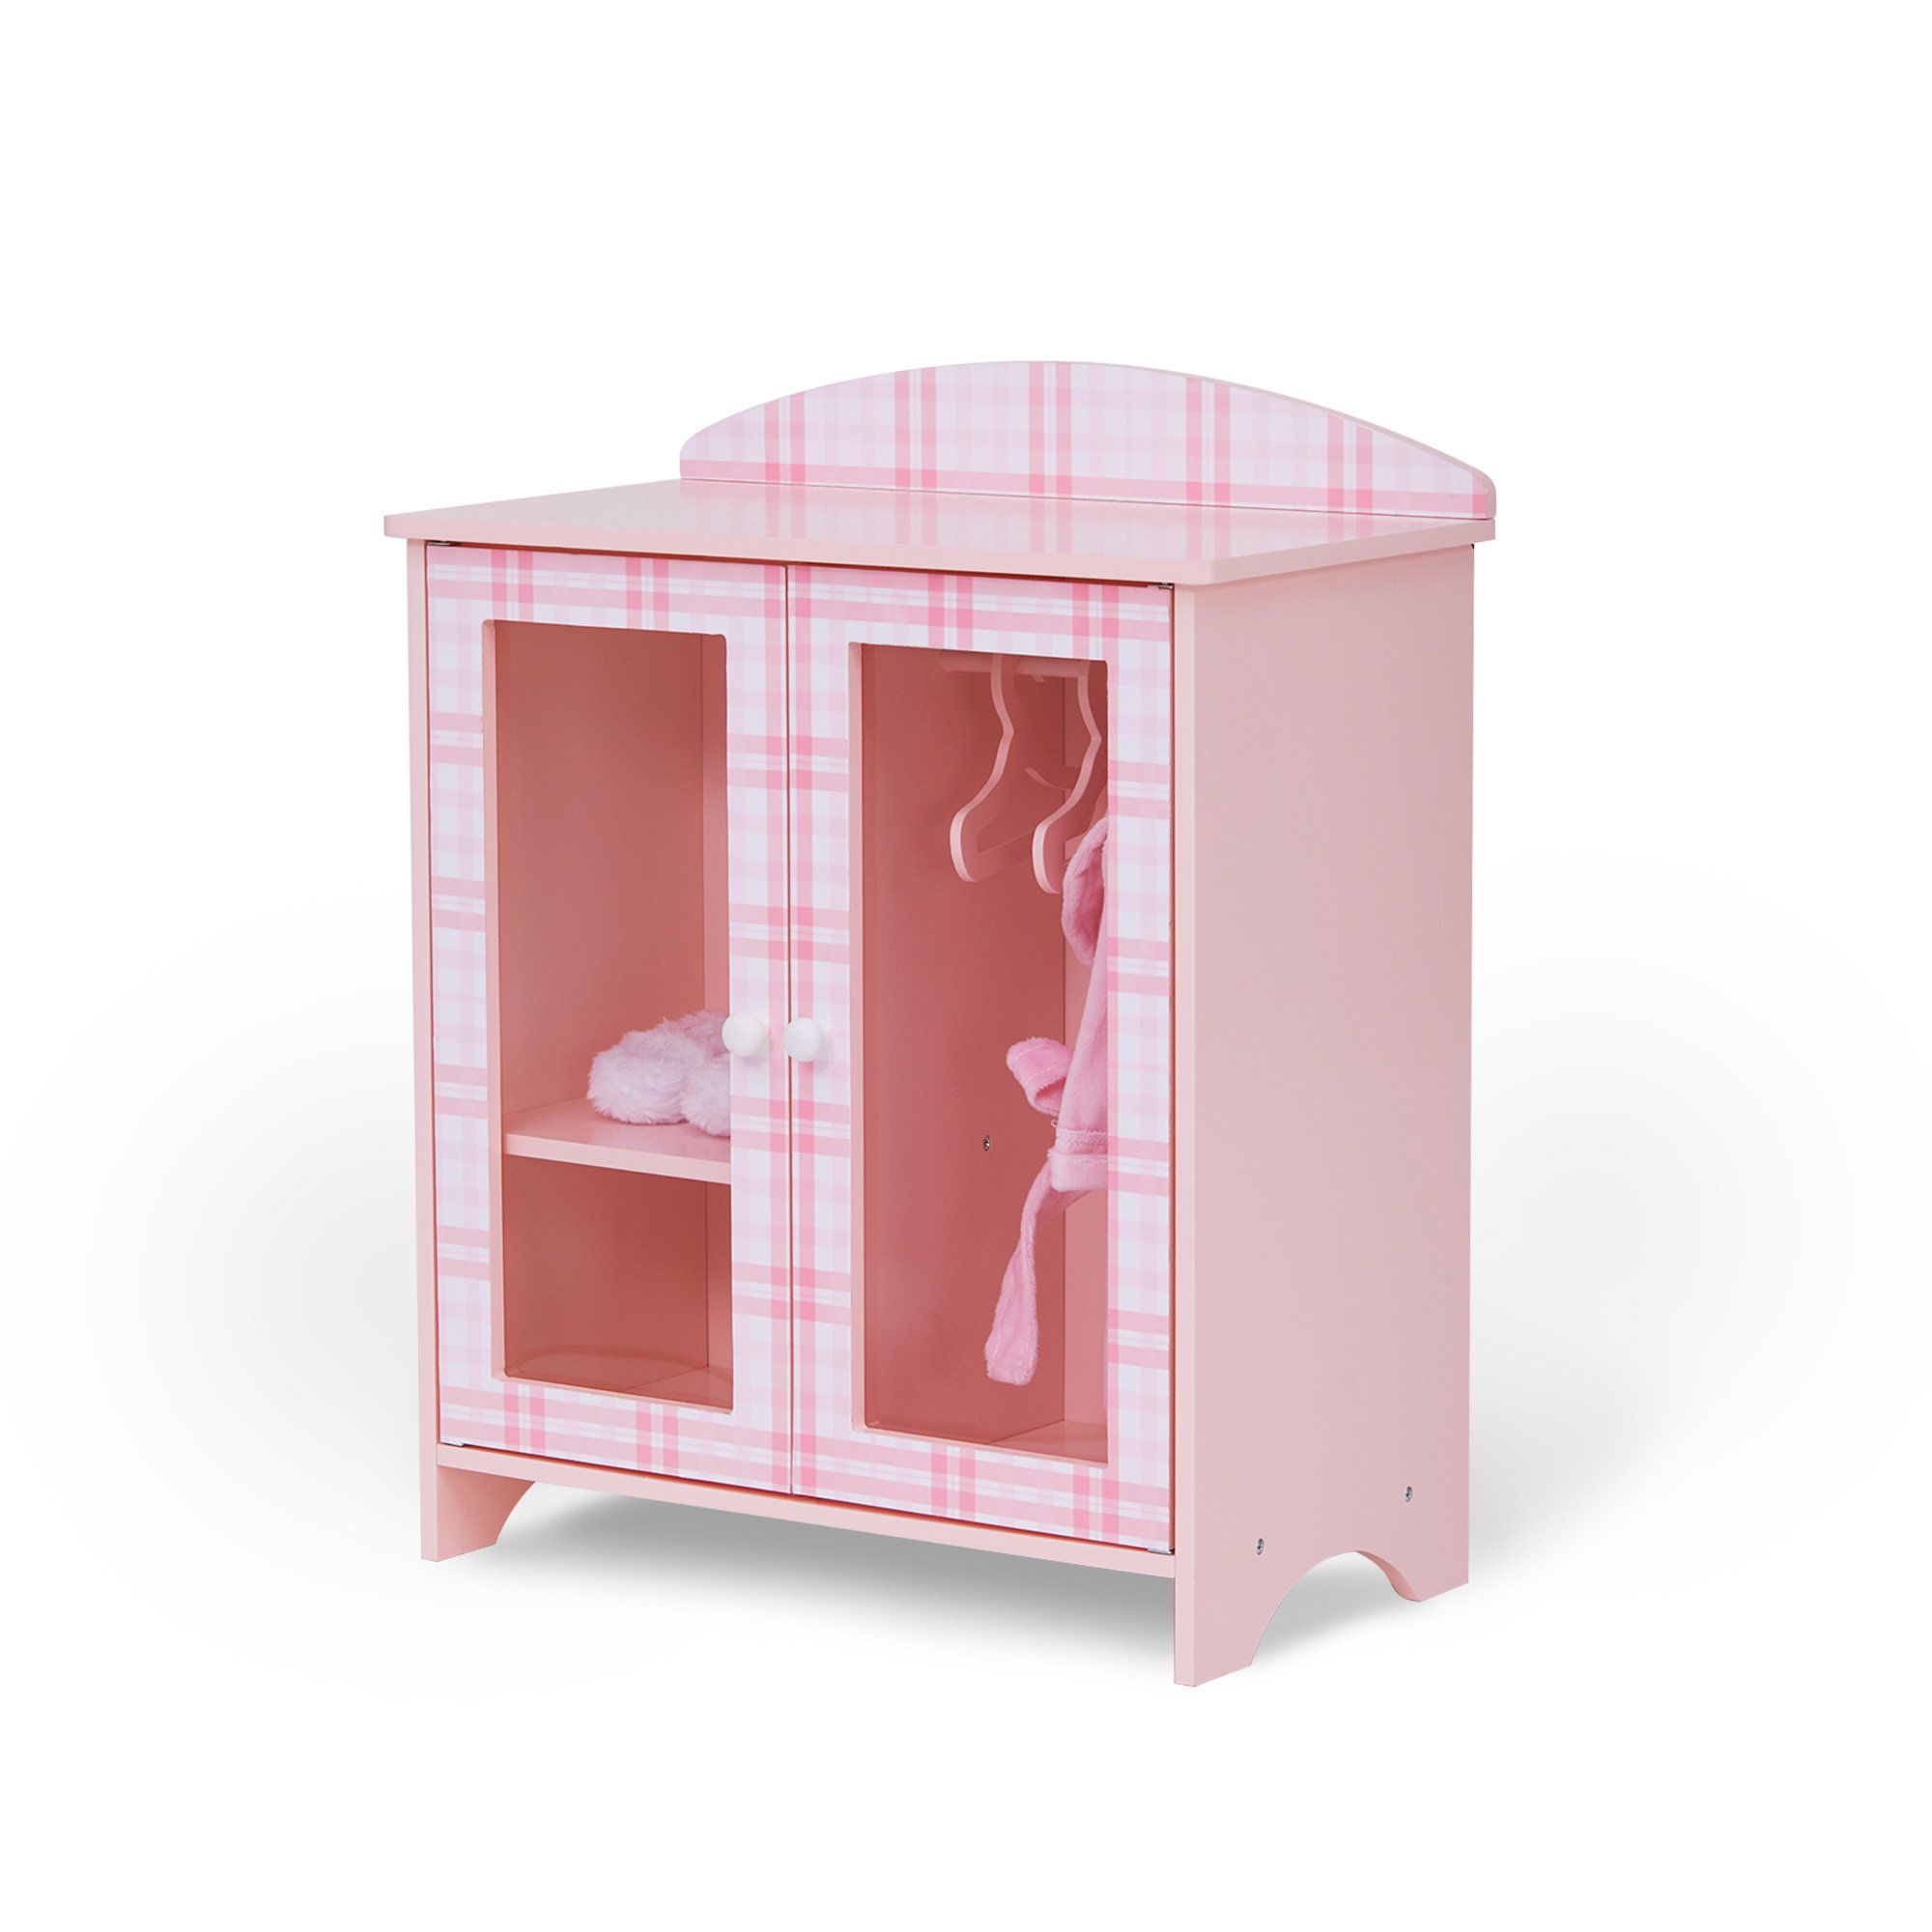 Sophia's Princess Closet Dollhouse Furniture And Accessories | Wayfair Intended For Princess Wardrobes (View 15 of 15)